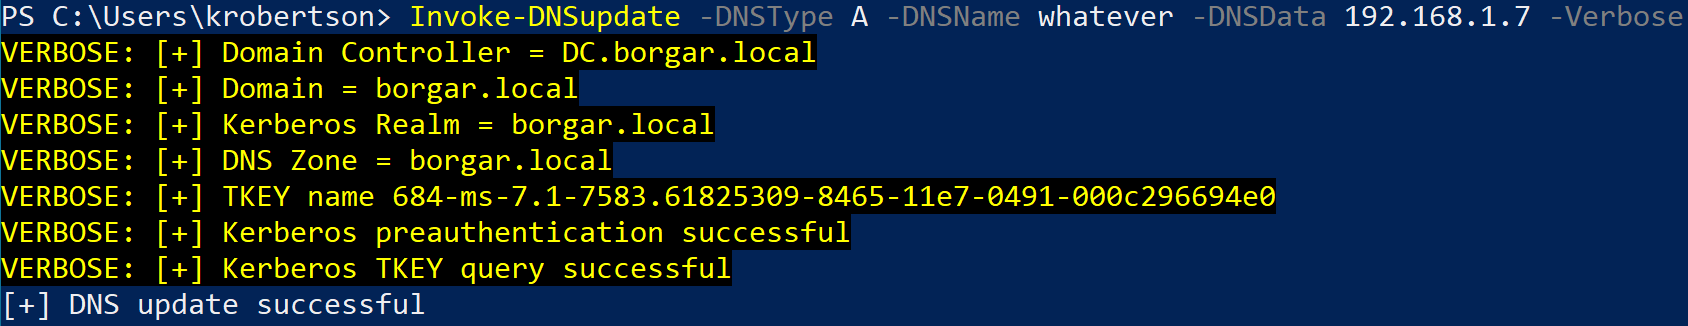 Creating a new DNS entry with the low-privileged krobertson account